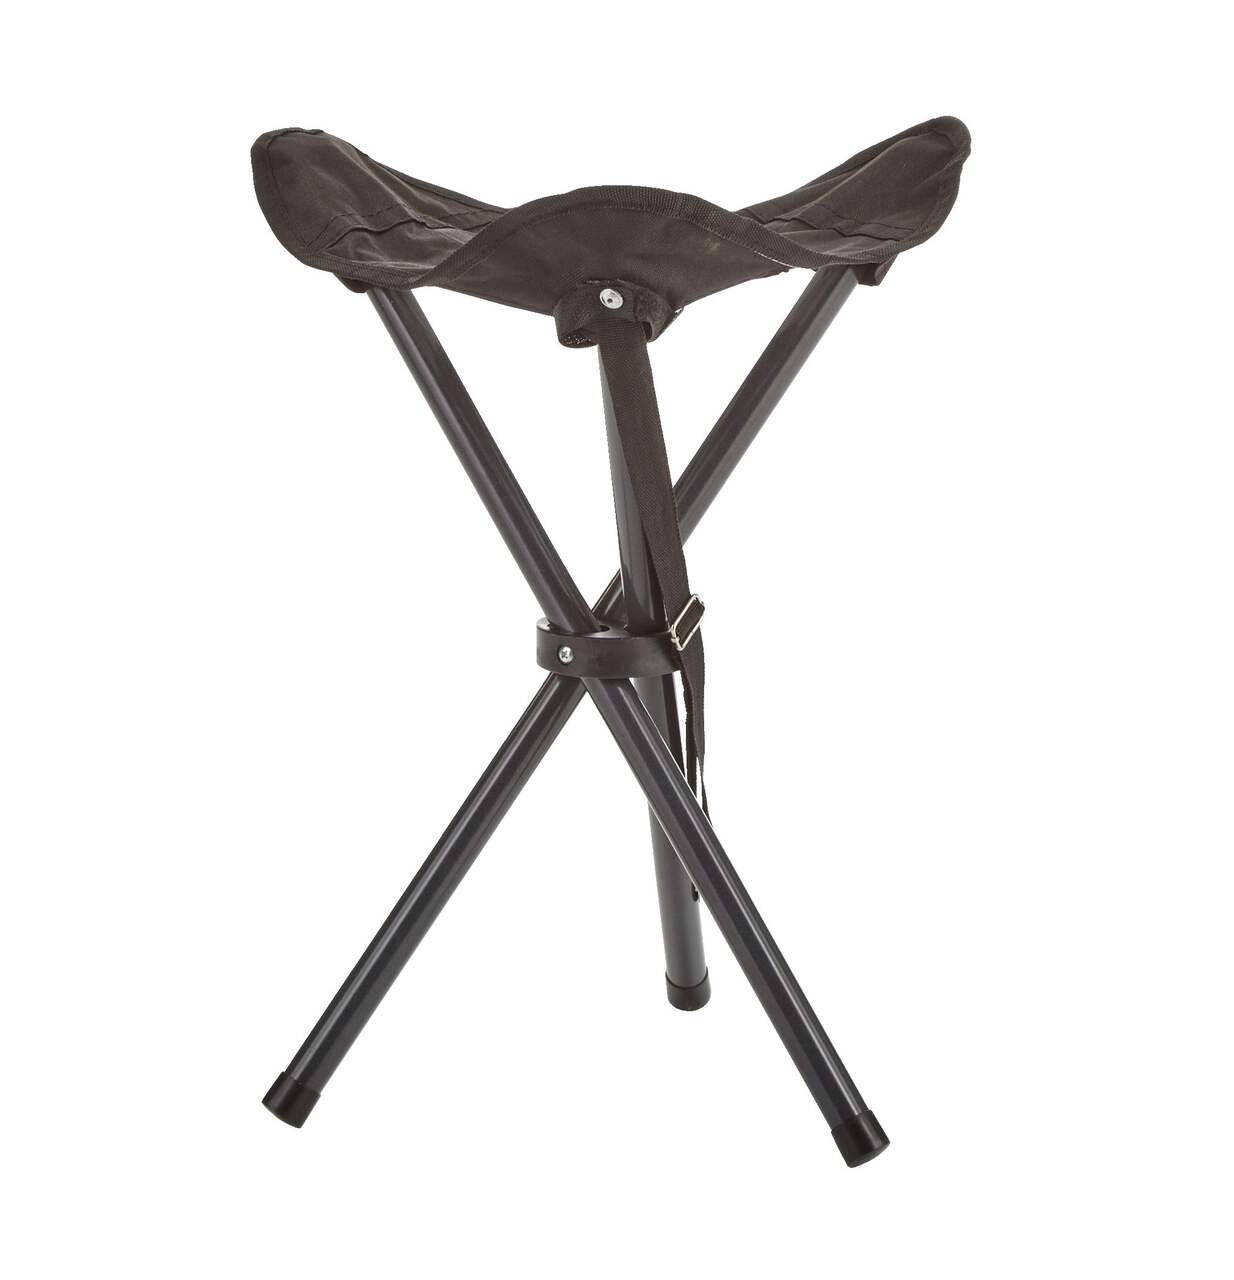 https://media-www.canadiantire.ca/product/playing/camping/camping-furniture/0765475/outbound-camp-stool-845c2714-ed43-412c-97bb-7843a259152a-jpgrendition.jpg?imdensity=1&imwidth=1244&impolicy=mZoom